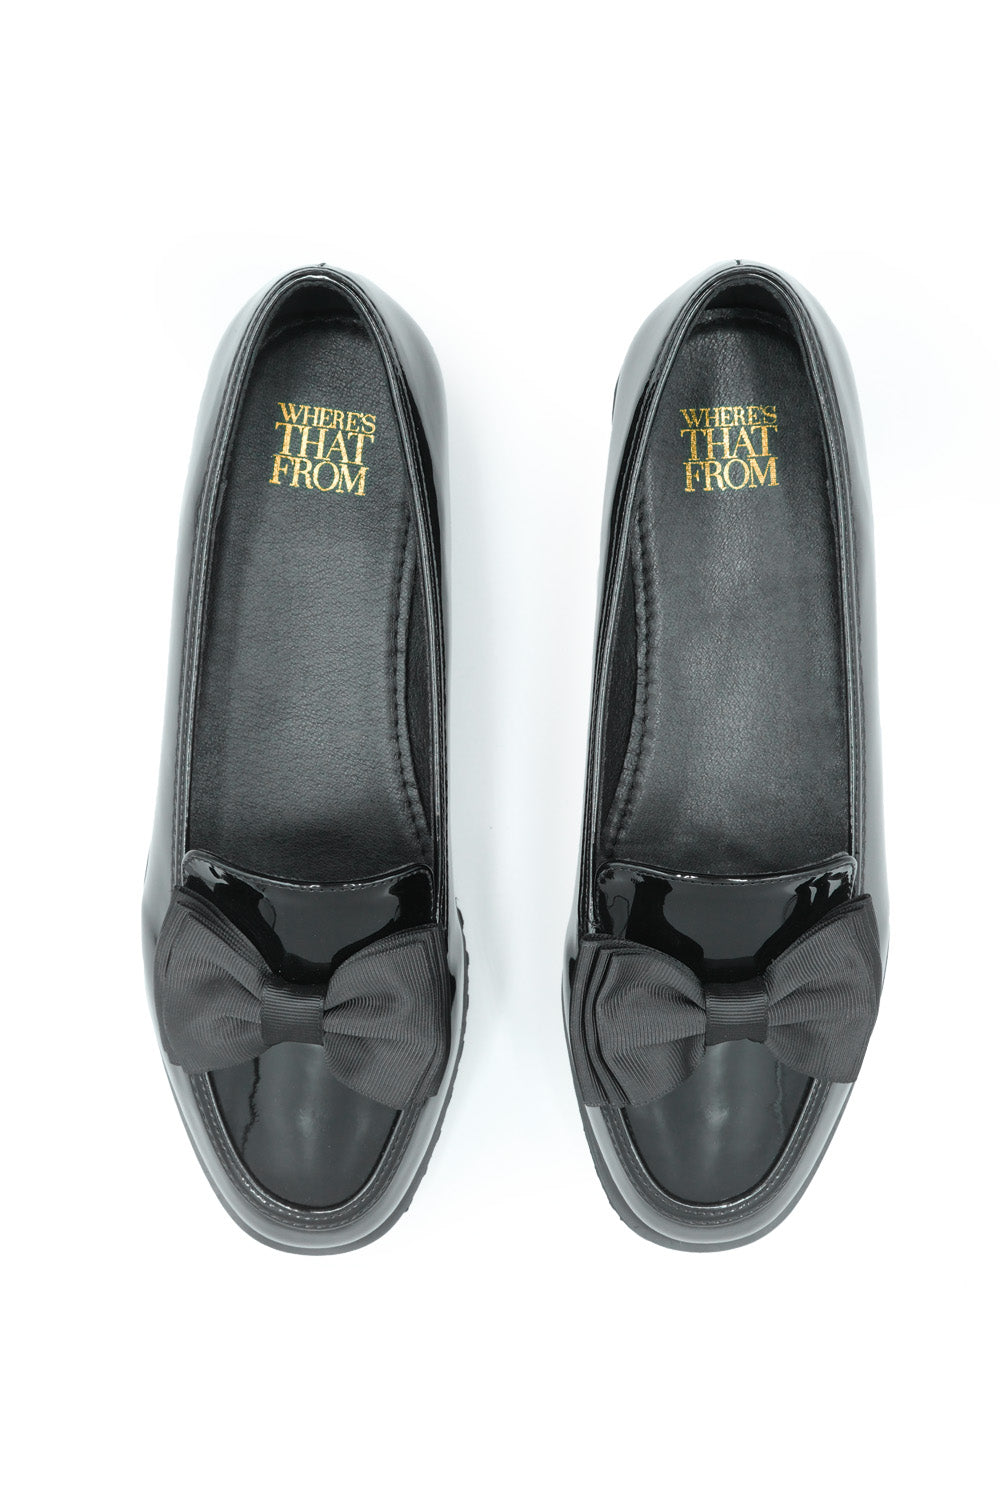 ALPHA SLIP ON LOAFER SLIDER WITH BOW DETAIL IN BLACK PATENT FAUX LEATHER